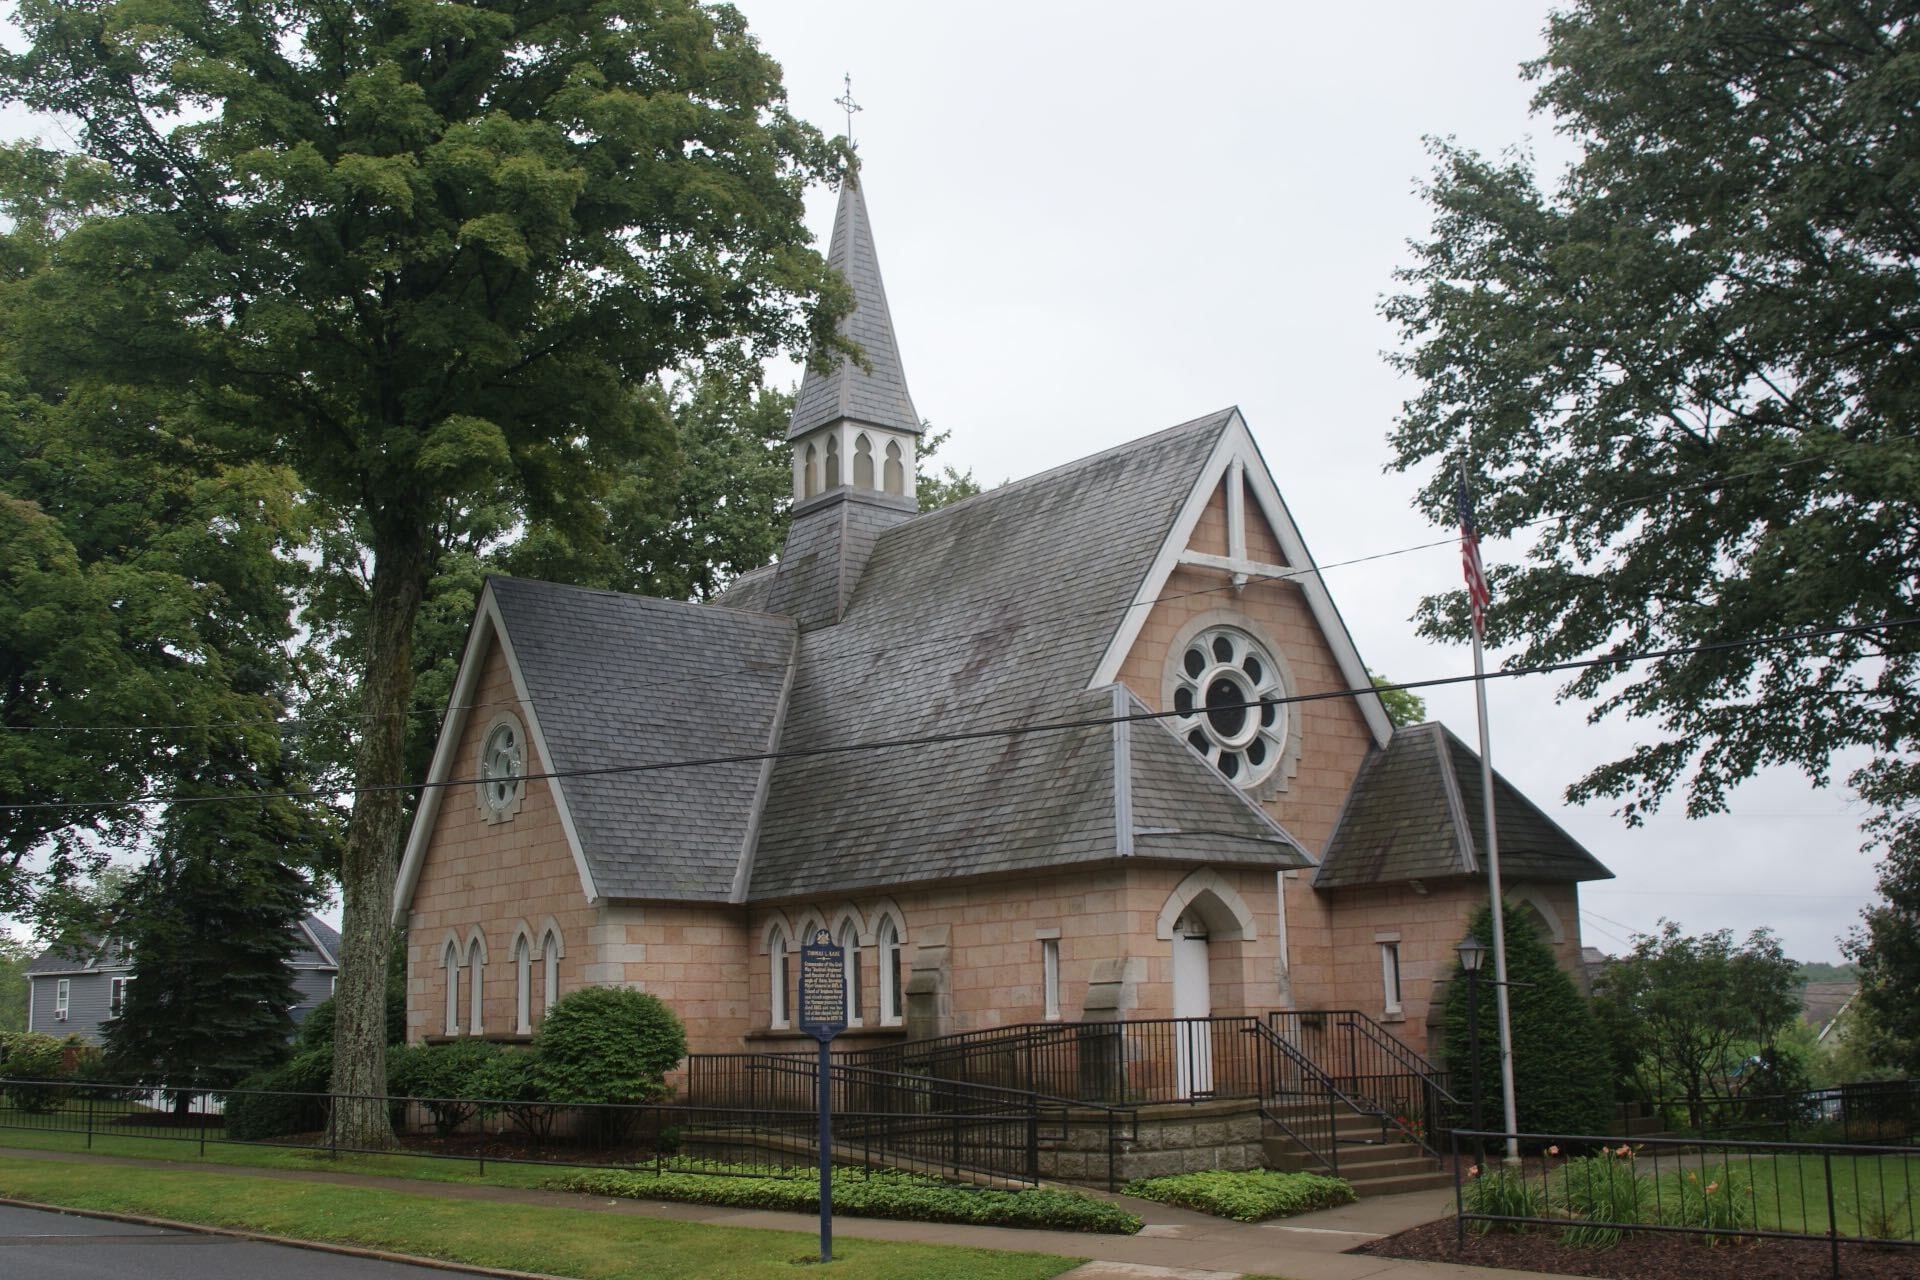 (The Salt Lake Tribune) The historic Thomas L. Kane Memorial Chapel in Kane, Pa. It honors the building's namesake, who was an ally of early Latter-day Saints. The Church of Jesus Christ of Latter-day Saints bought the cross-adorned chapel and later donated it to the Kane Historic Preservation Society.